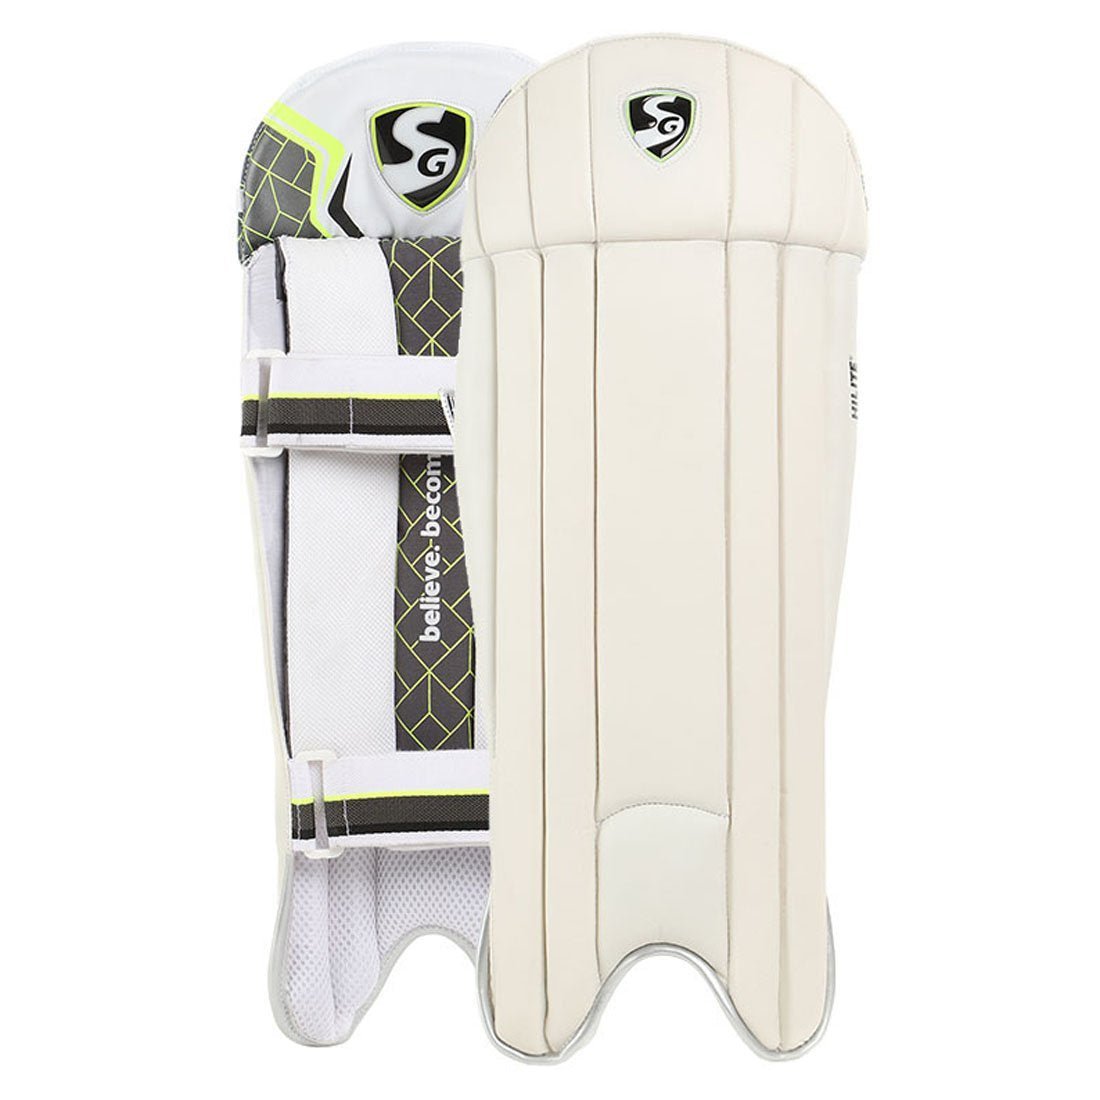 SG Hilite Cricket Wicket Keeping Pads.